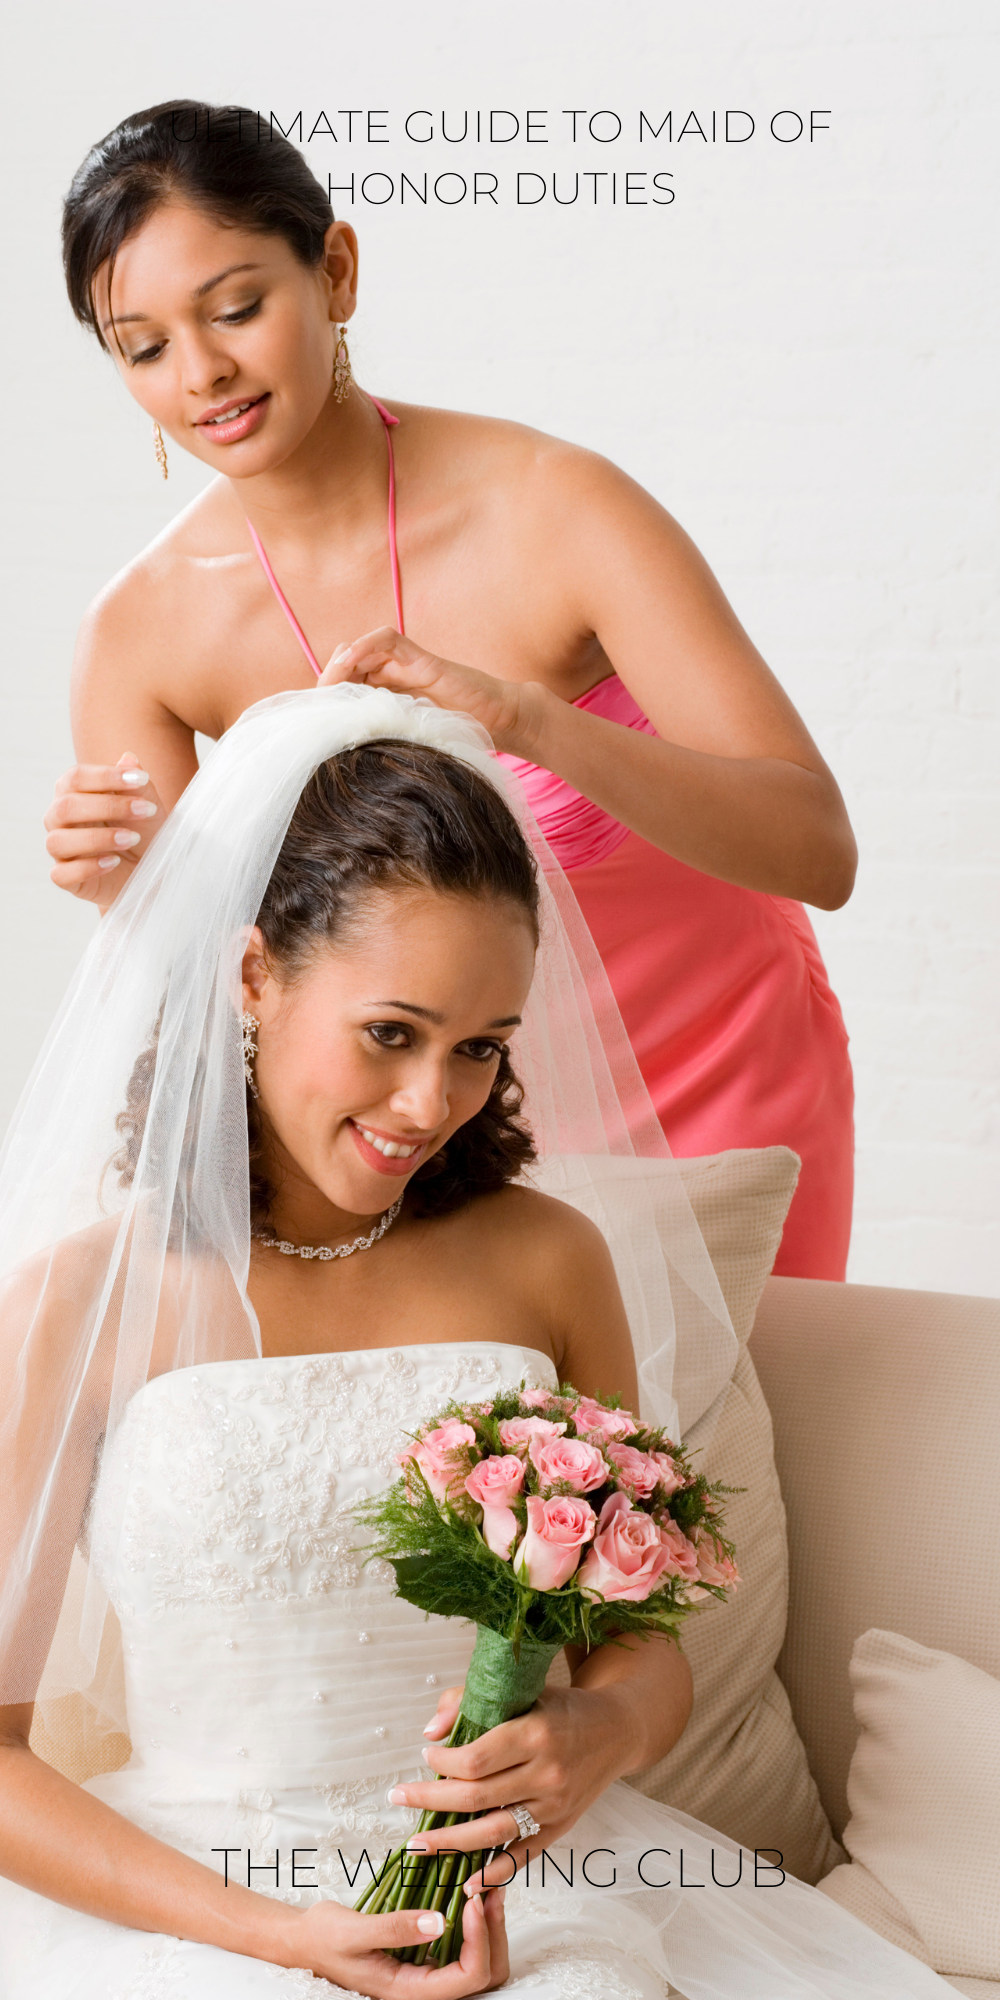 6. Ultimate Guide to Maid of Honor Duties A Comprehensive Wedding Responsibilities Checklist - The Wedding Club